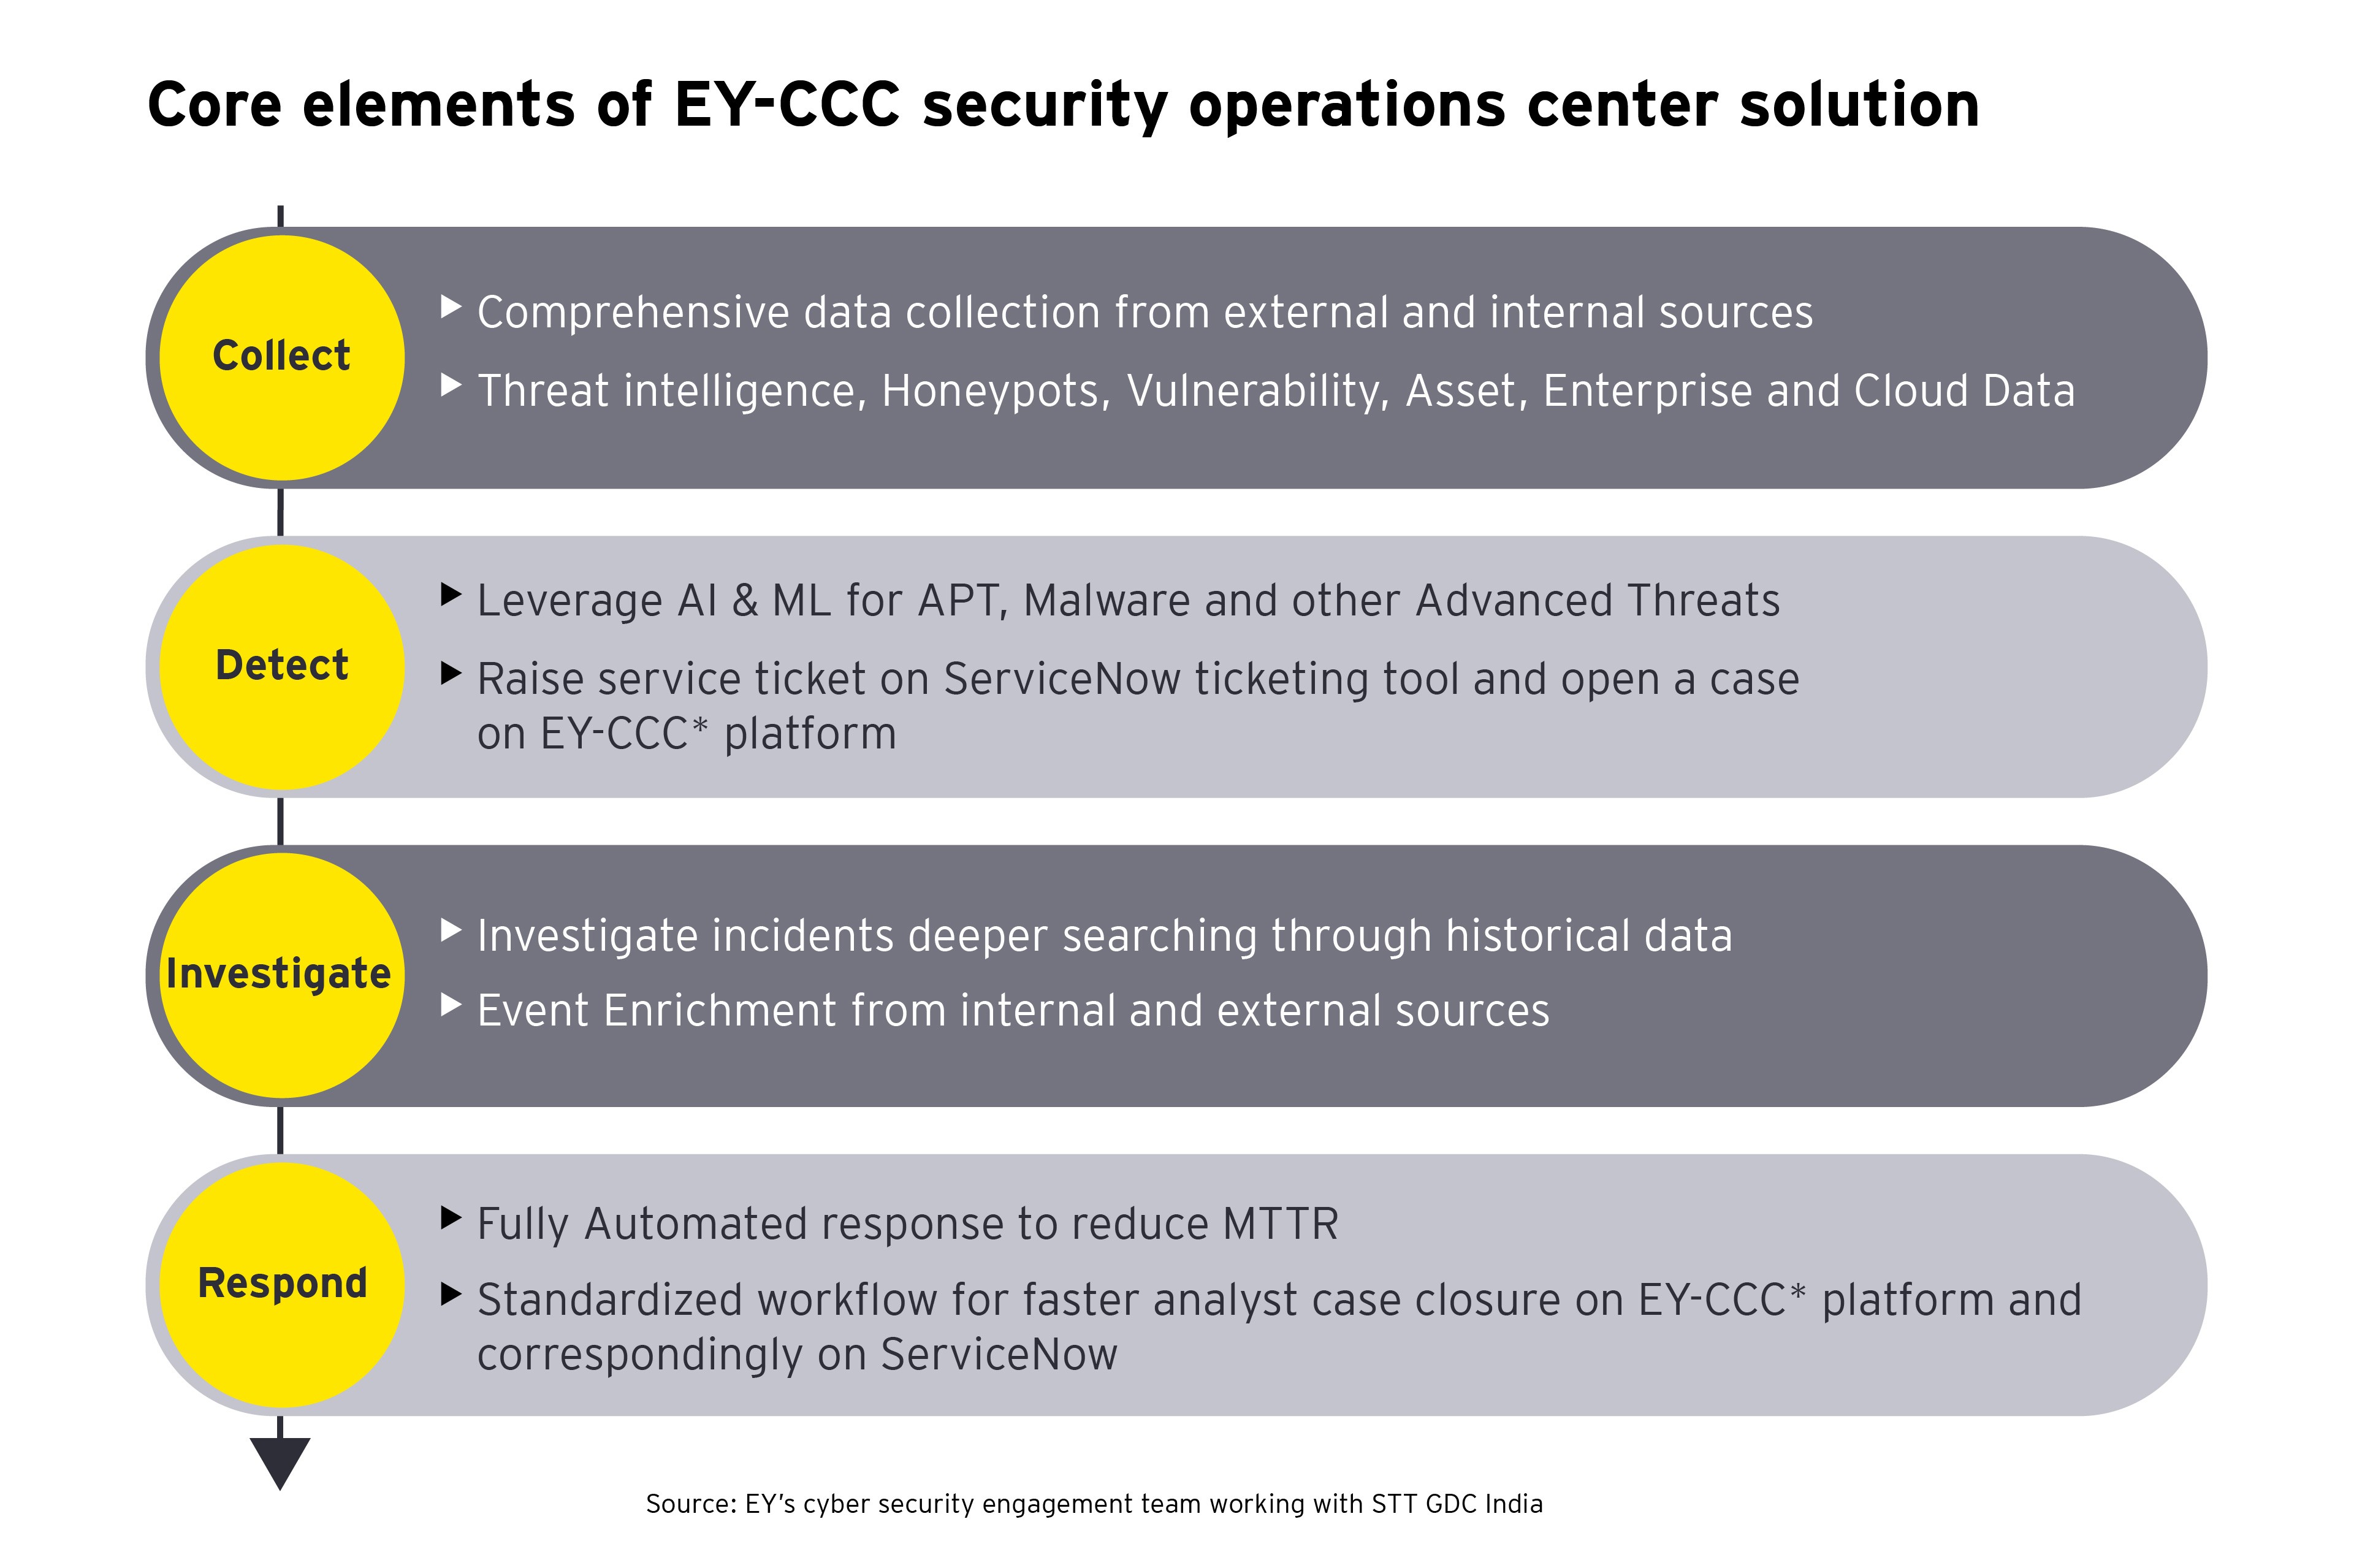 Core elements of EY-CCC security operations center solution